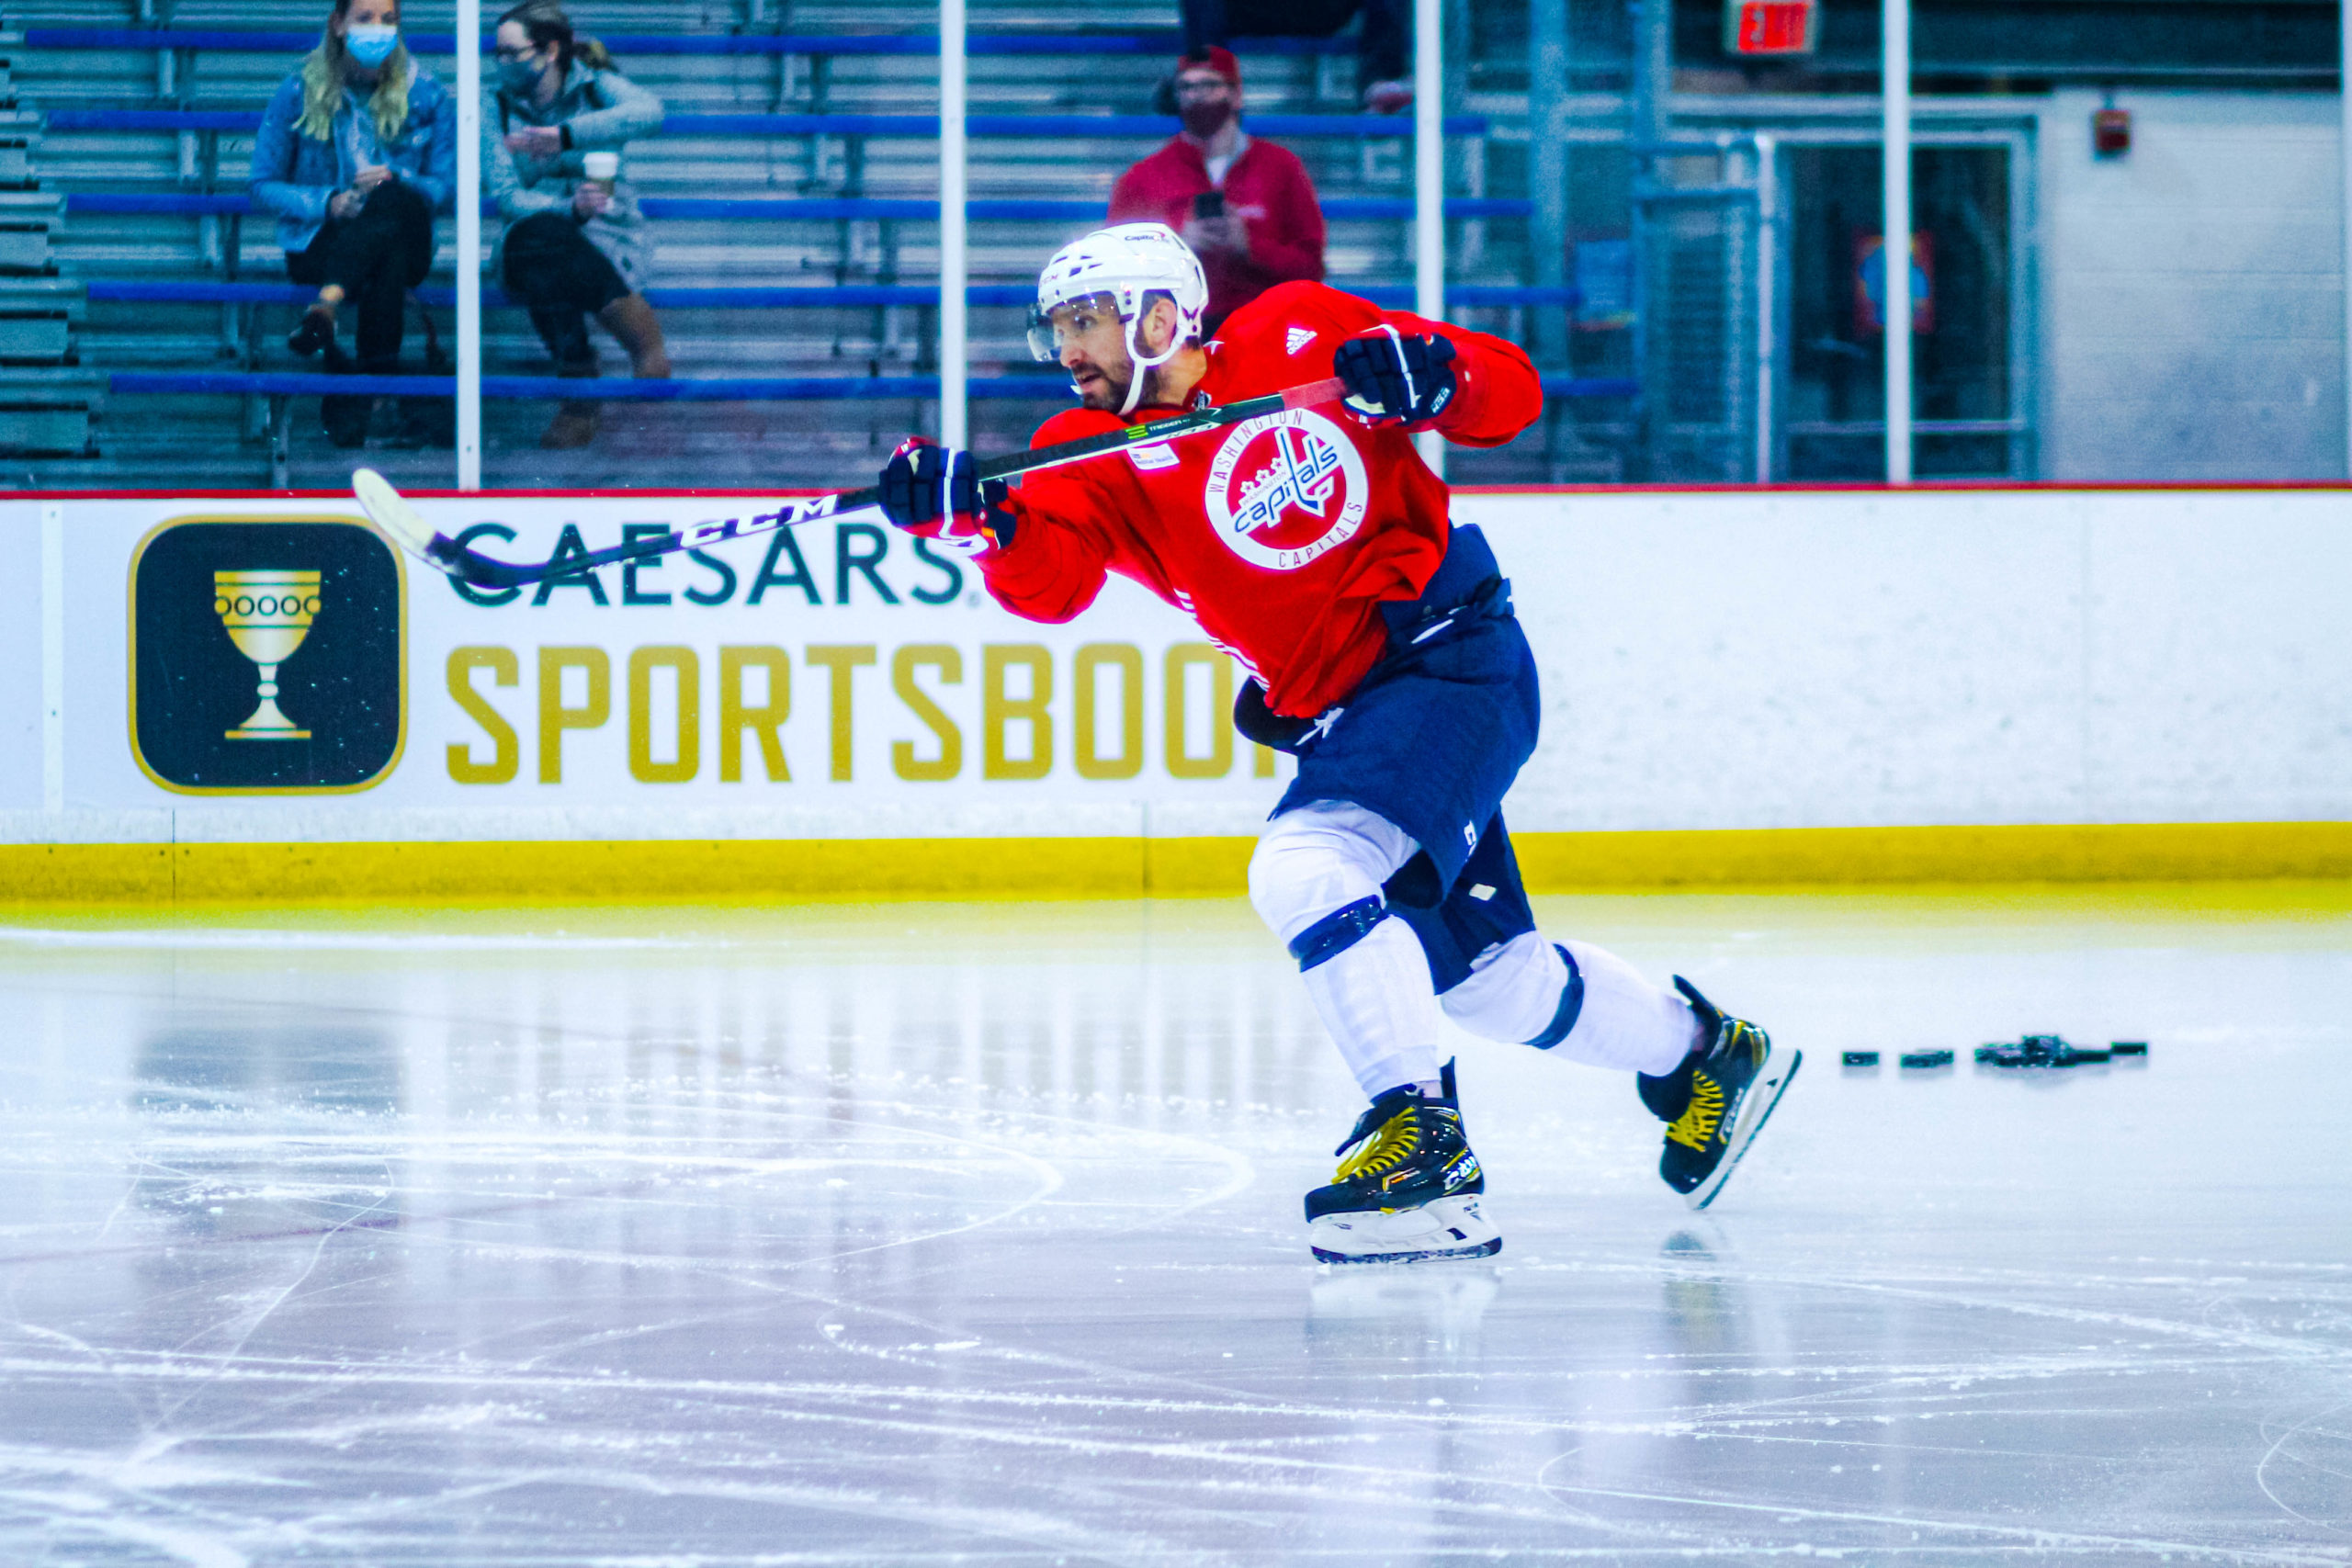 Capitals captain Alex Ovechkin has stood out at training camp.